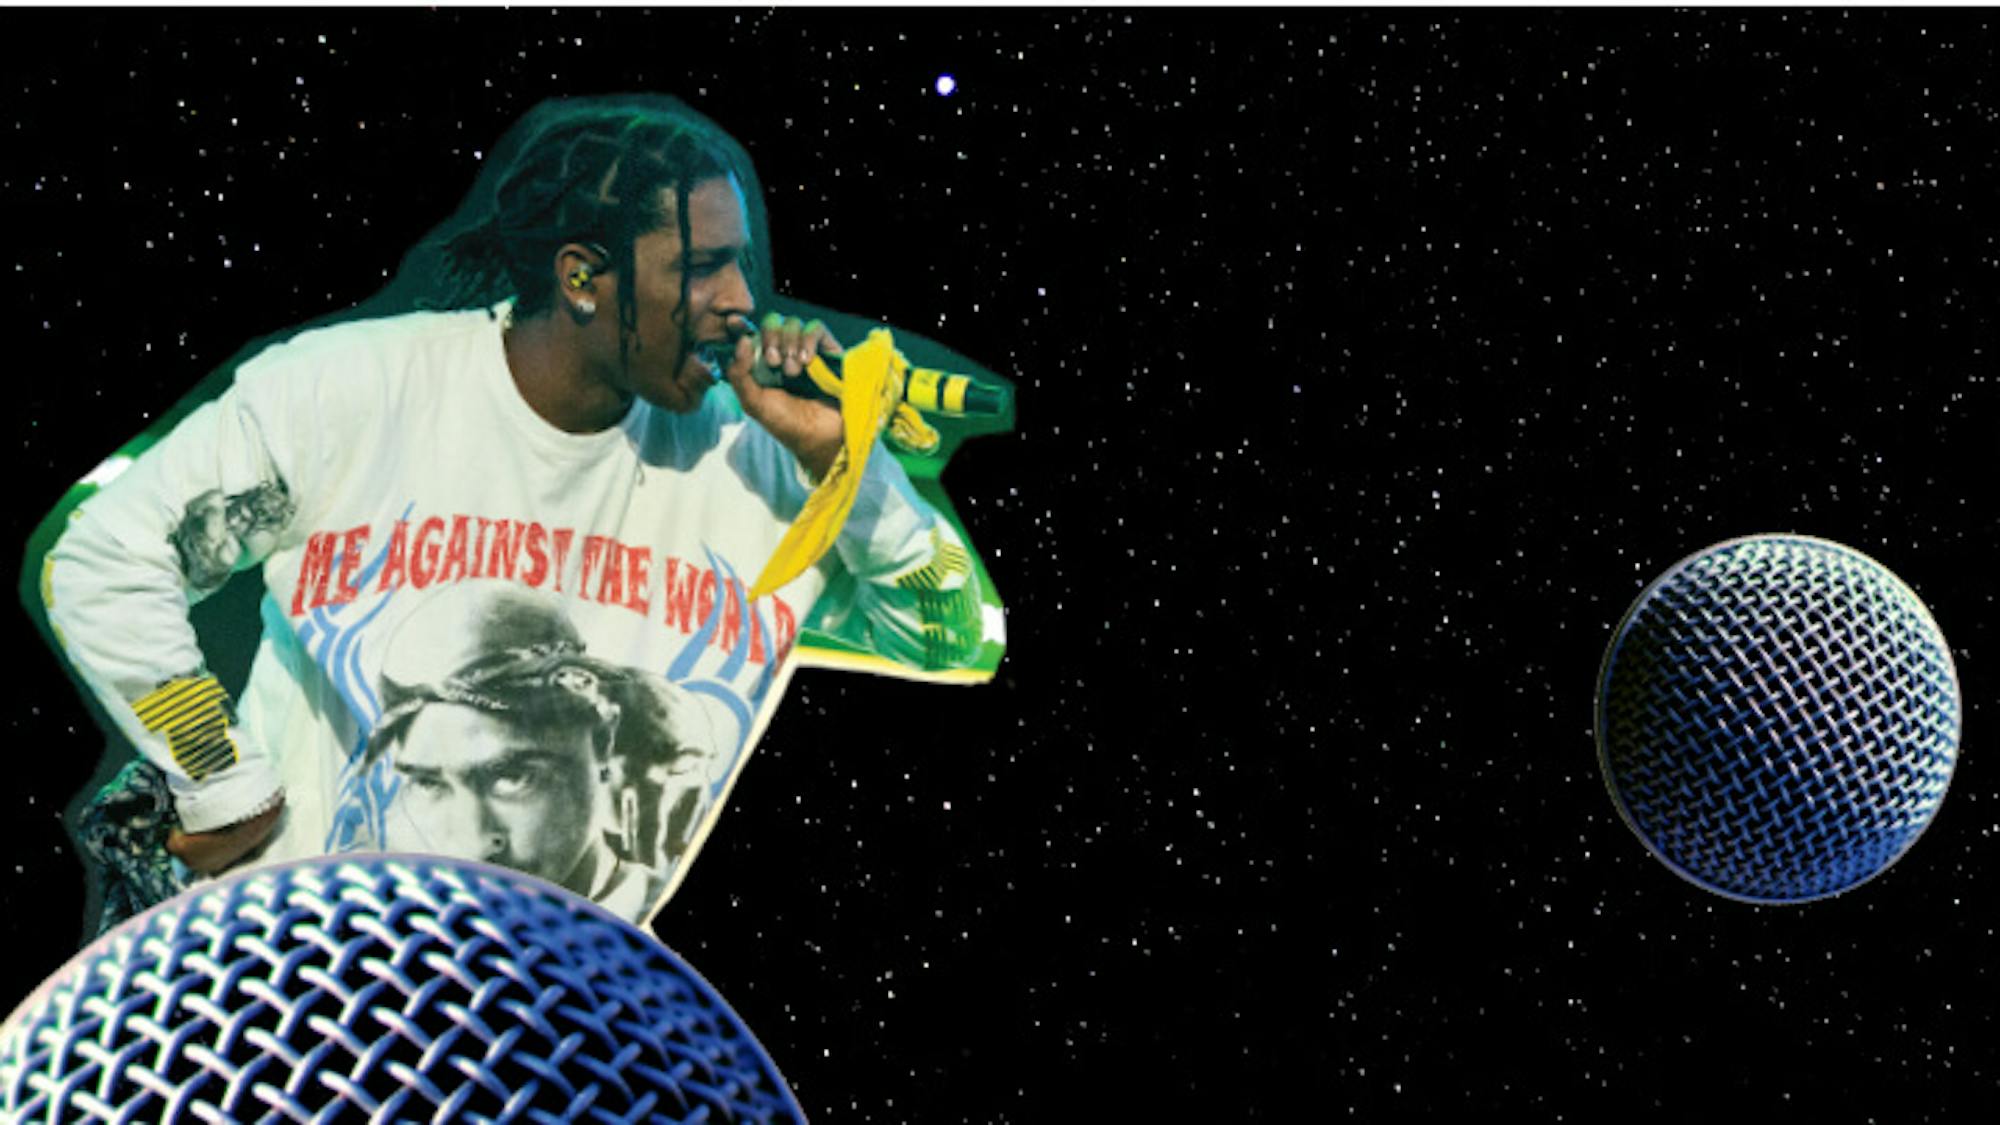 A$AP Rocky wears a Tupac shirt that reads “Me against the world” as he sings into a mike with a yellow bandana.